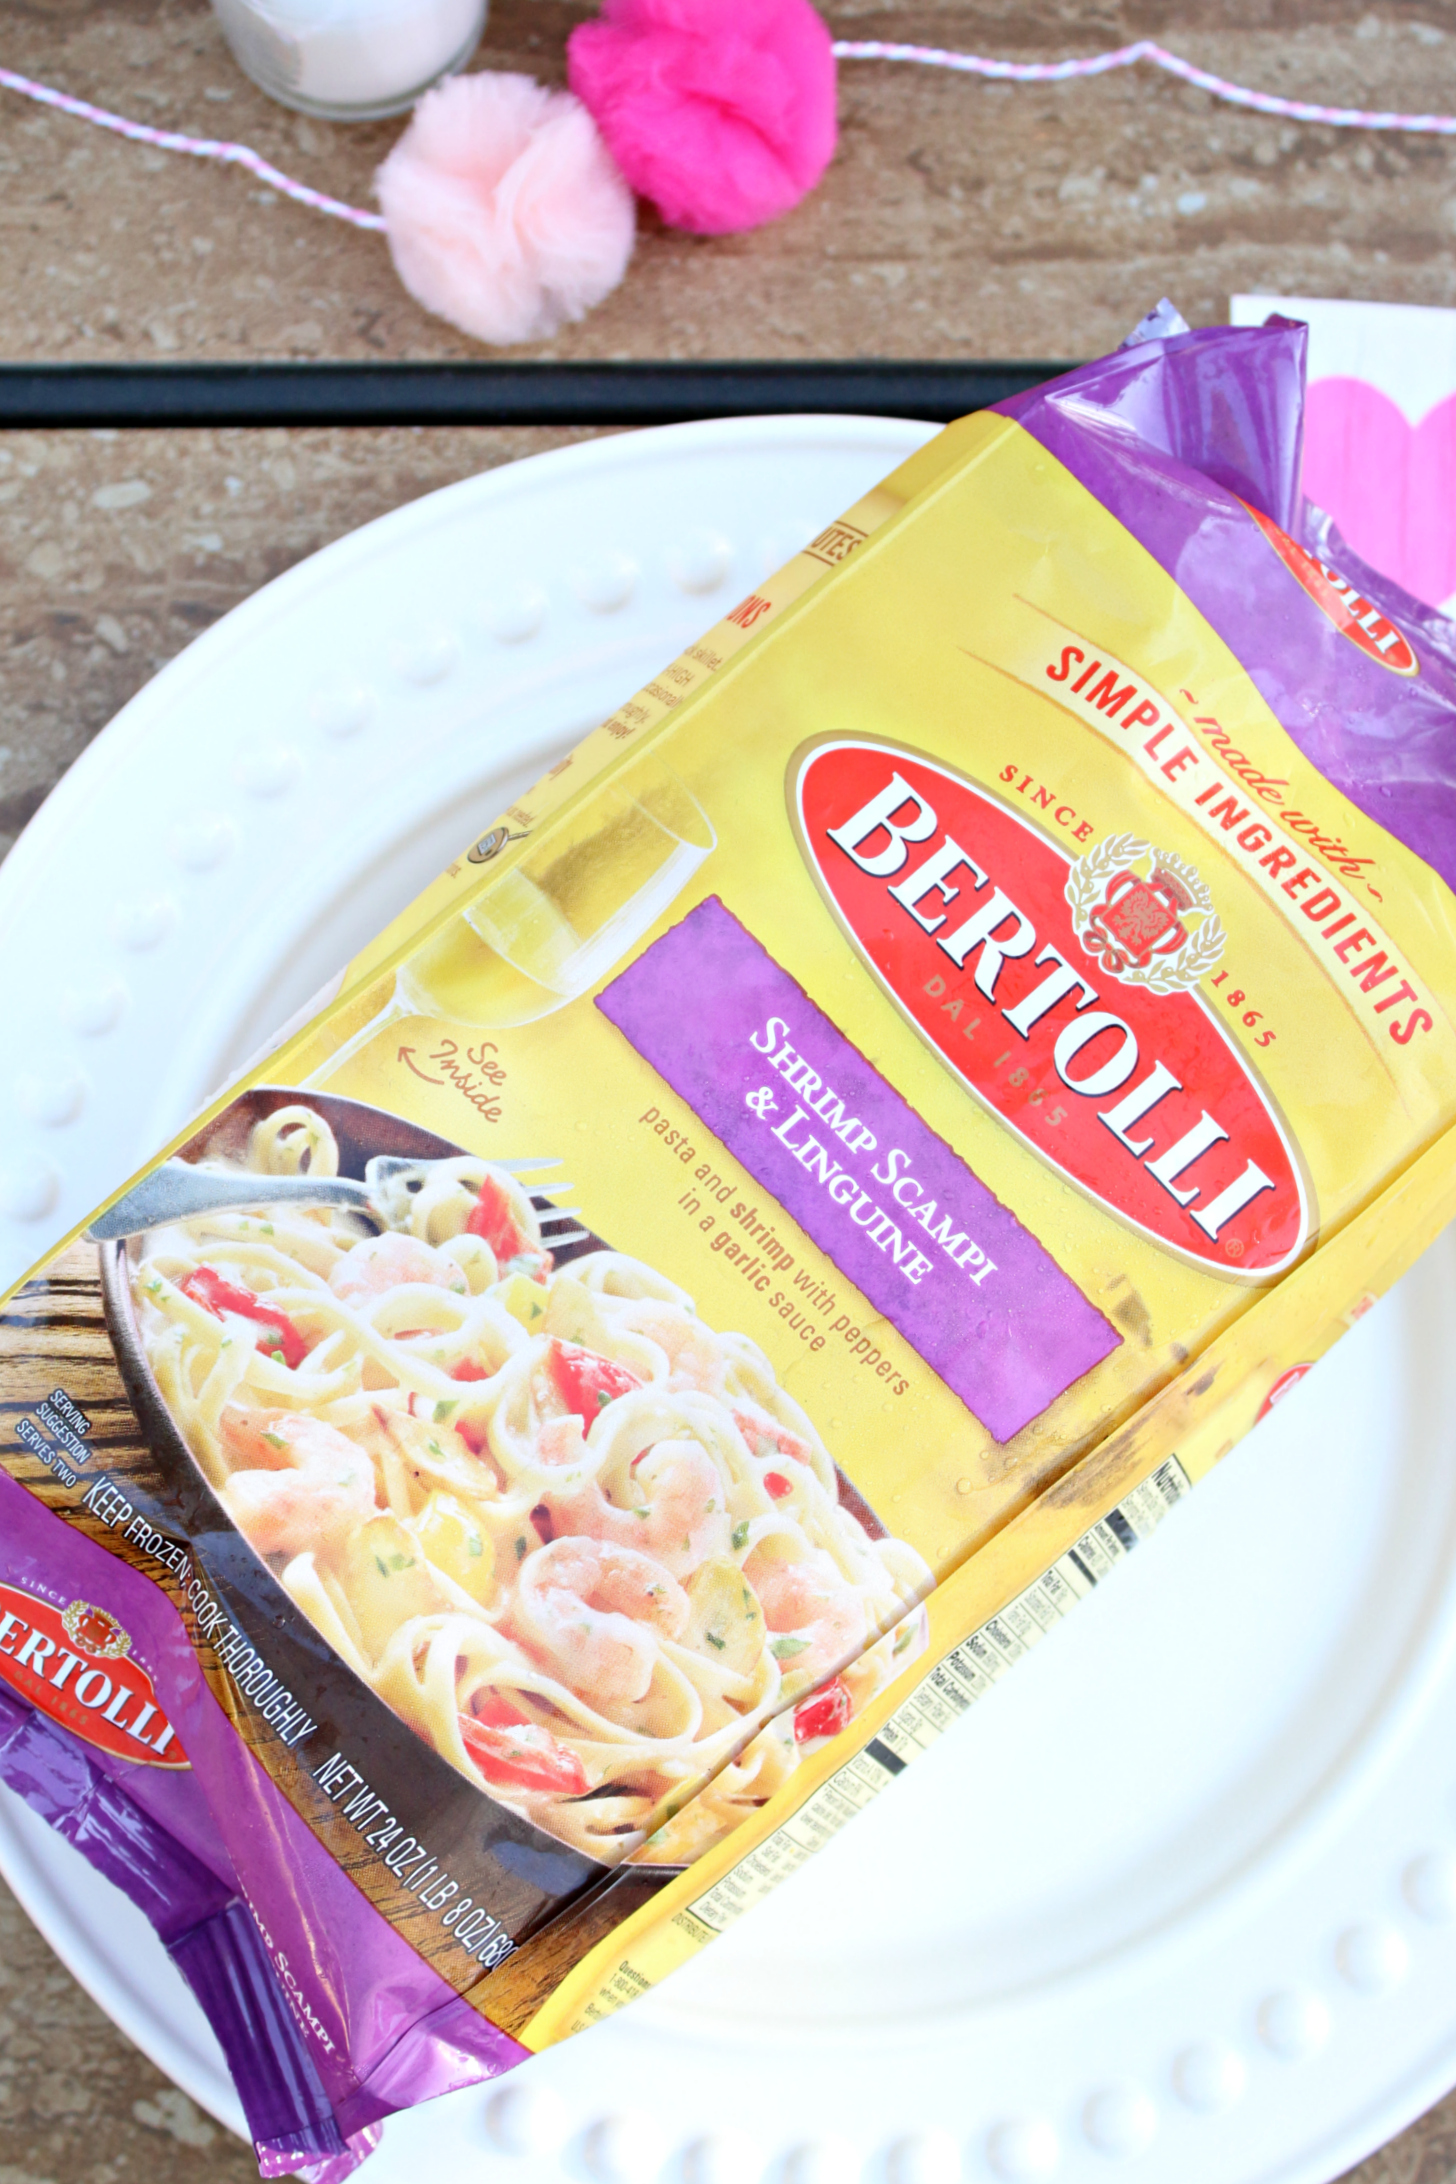 Easy date night dinner idea from Bertolli that's perfect for impromptu Valentine's Day celebrations!